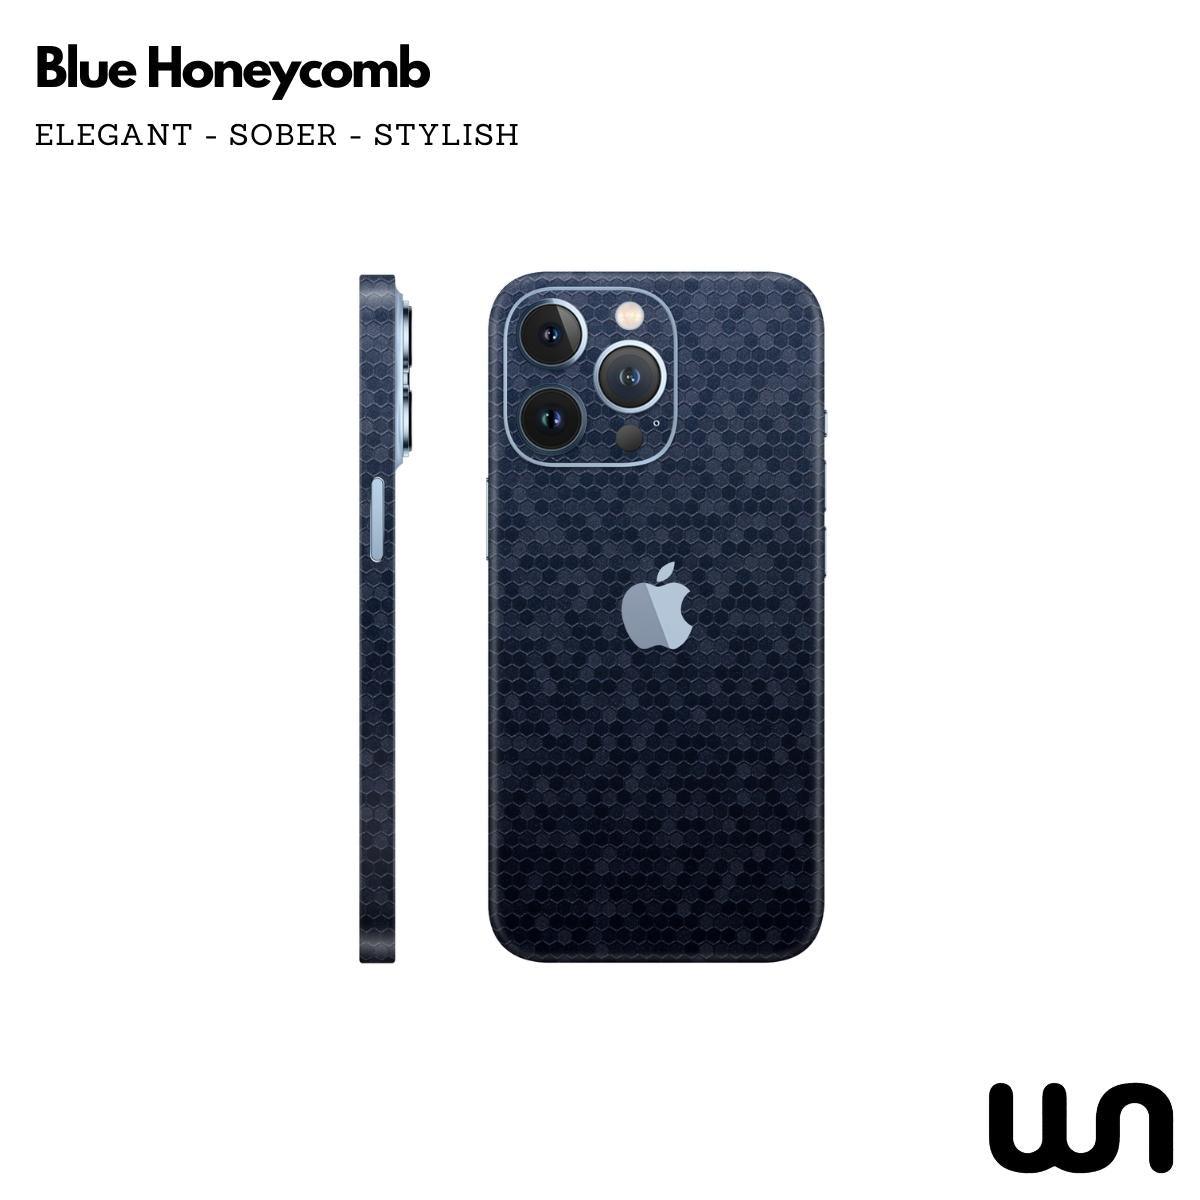 Honeycomb Blue Textured Skin for iPhone 13 Pro